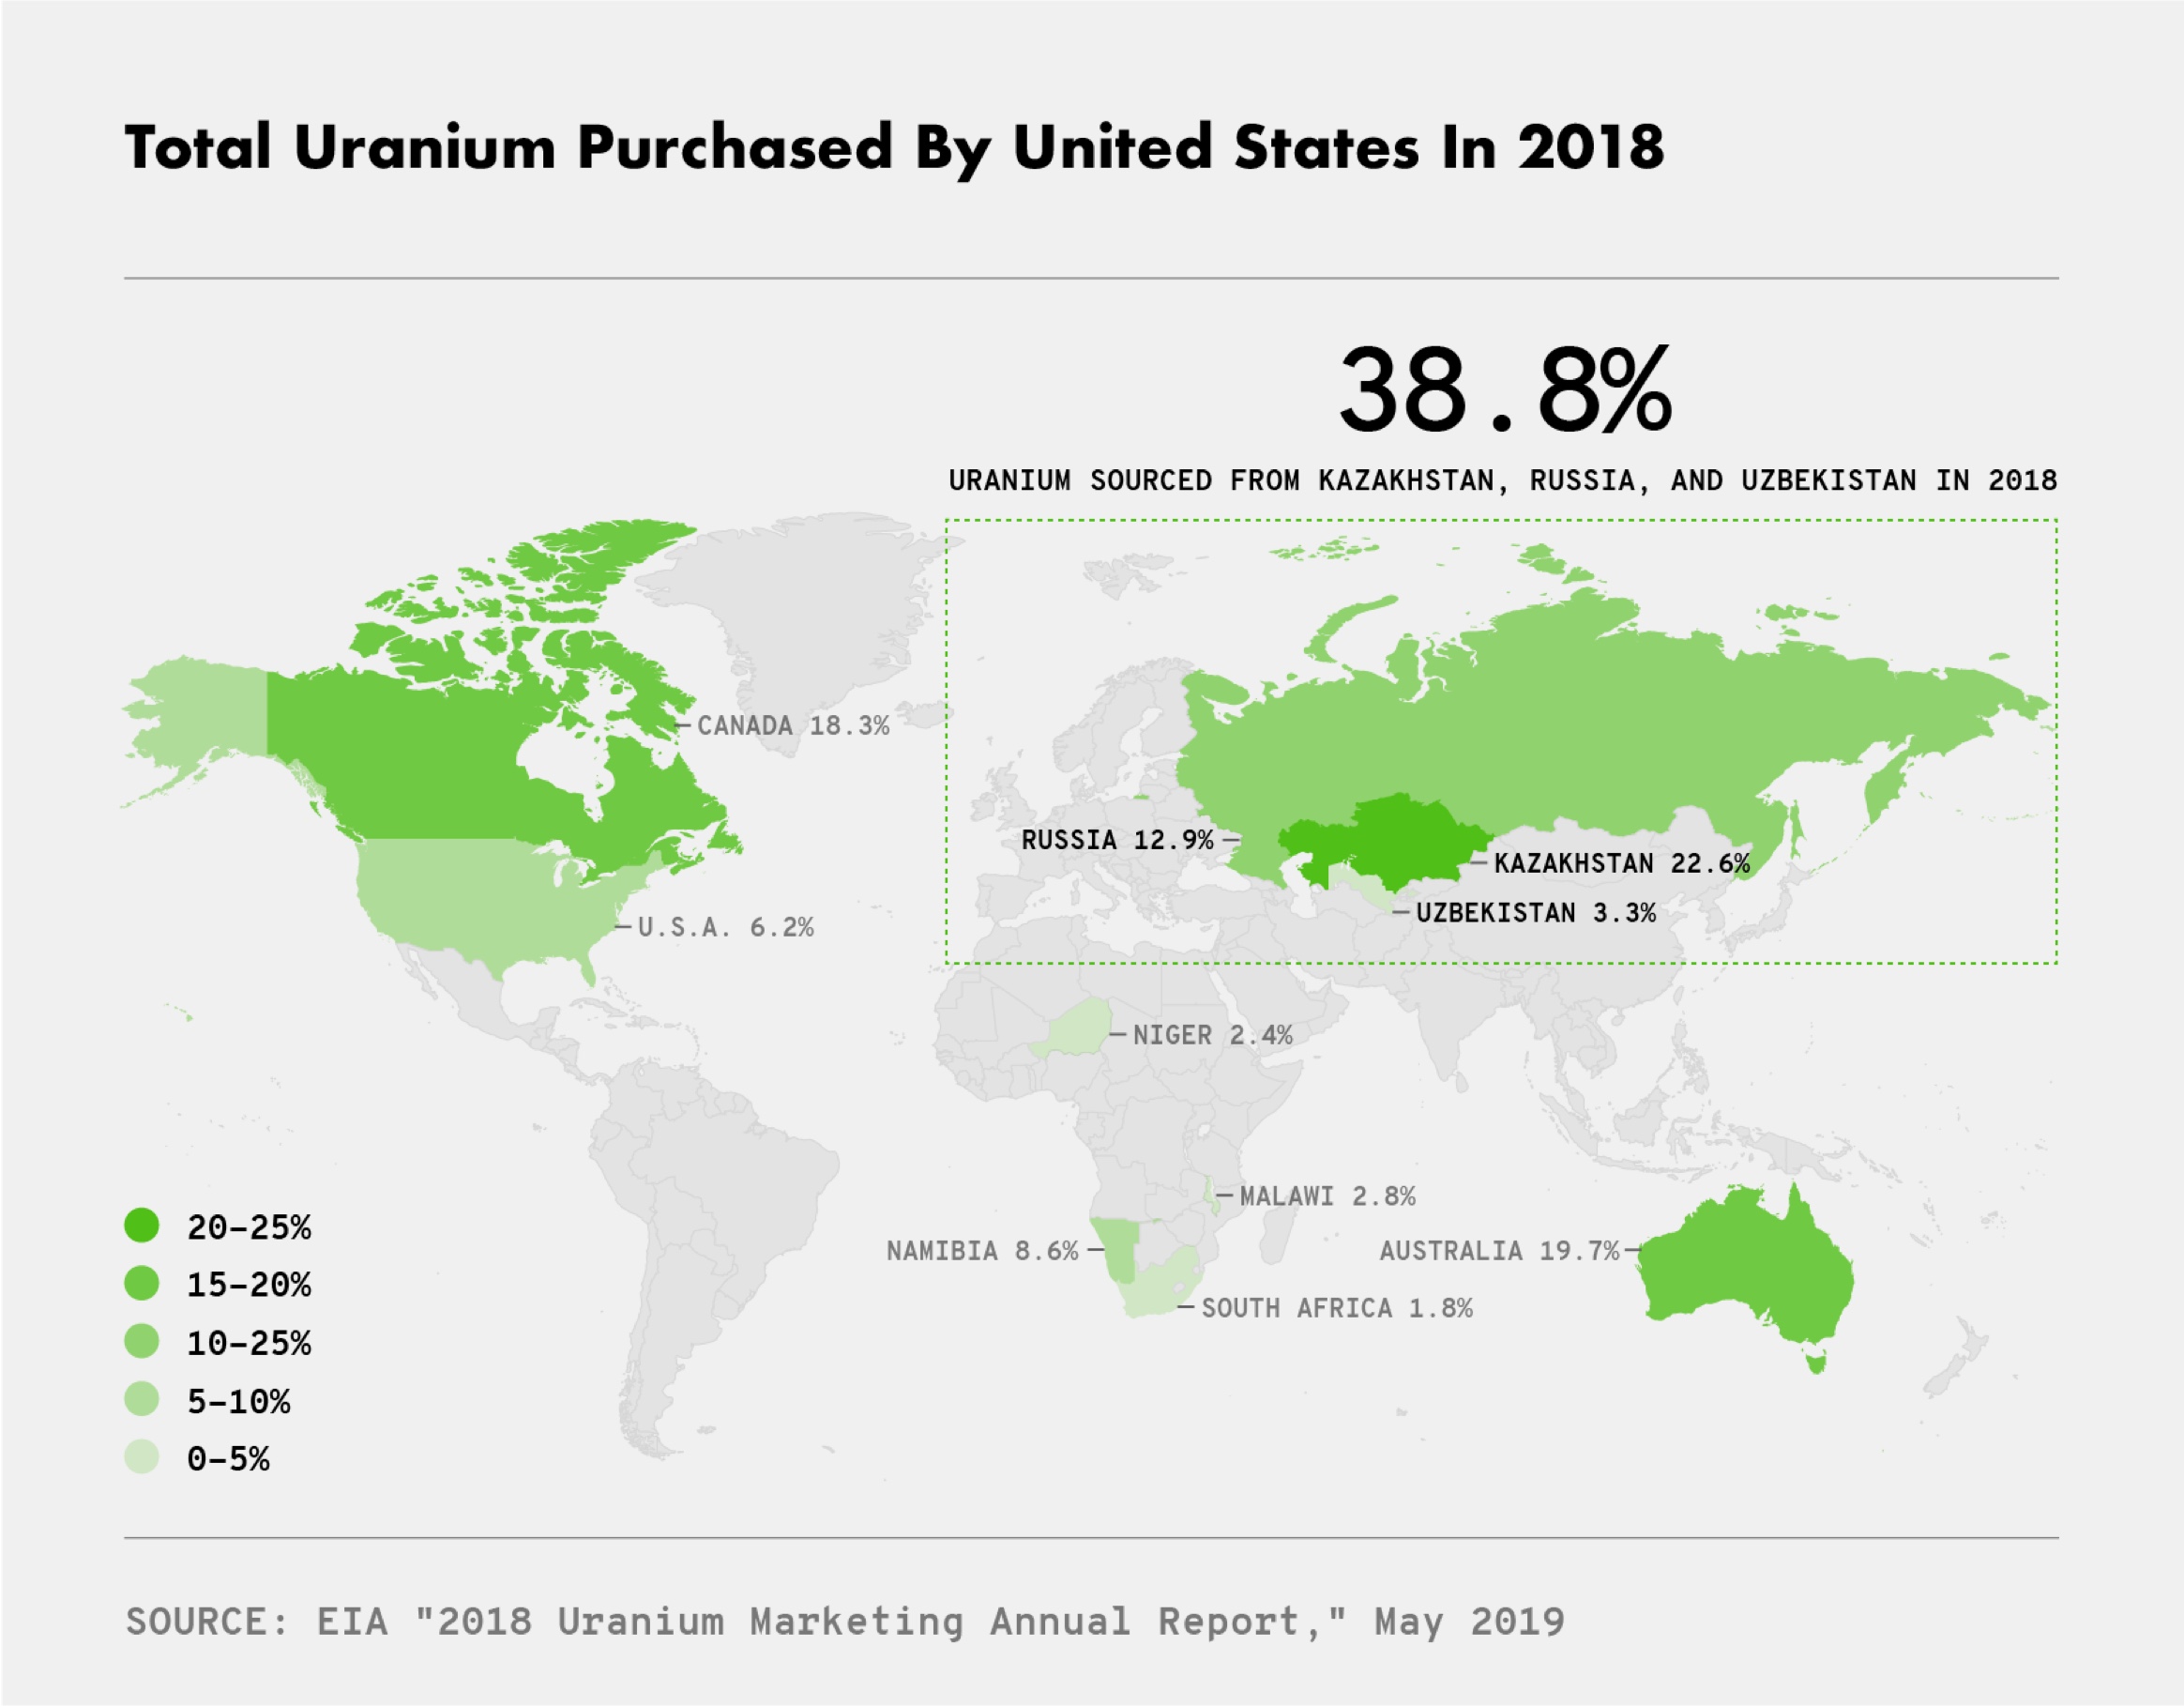 Total Uranium Purchased By Unisted States in 2018